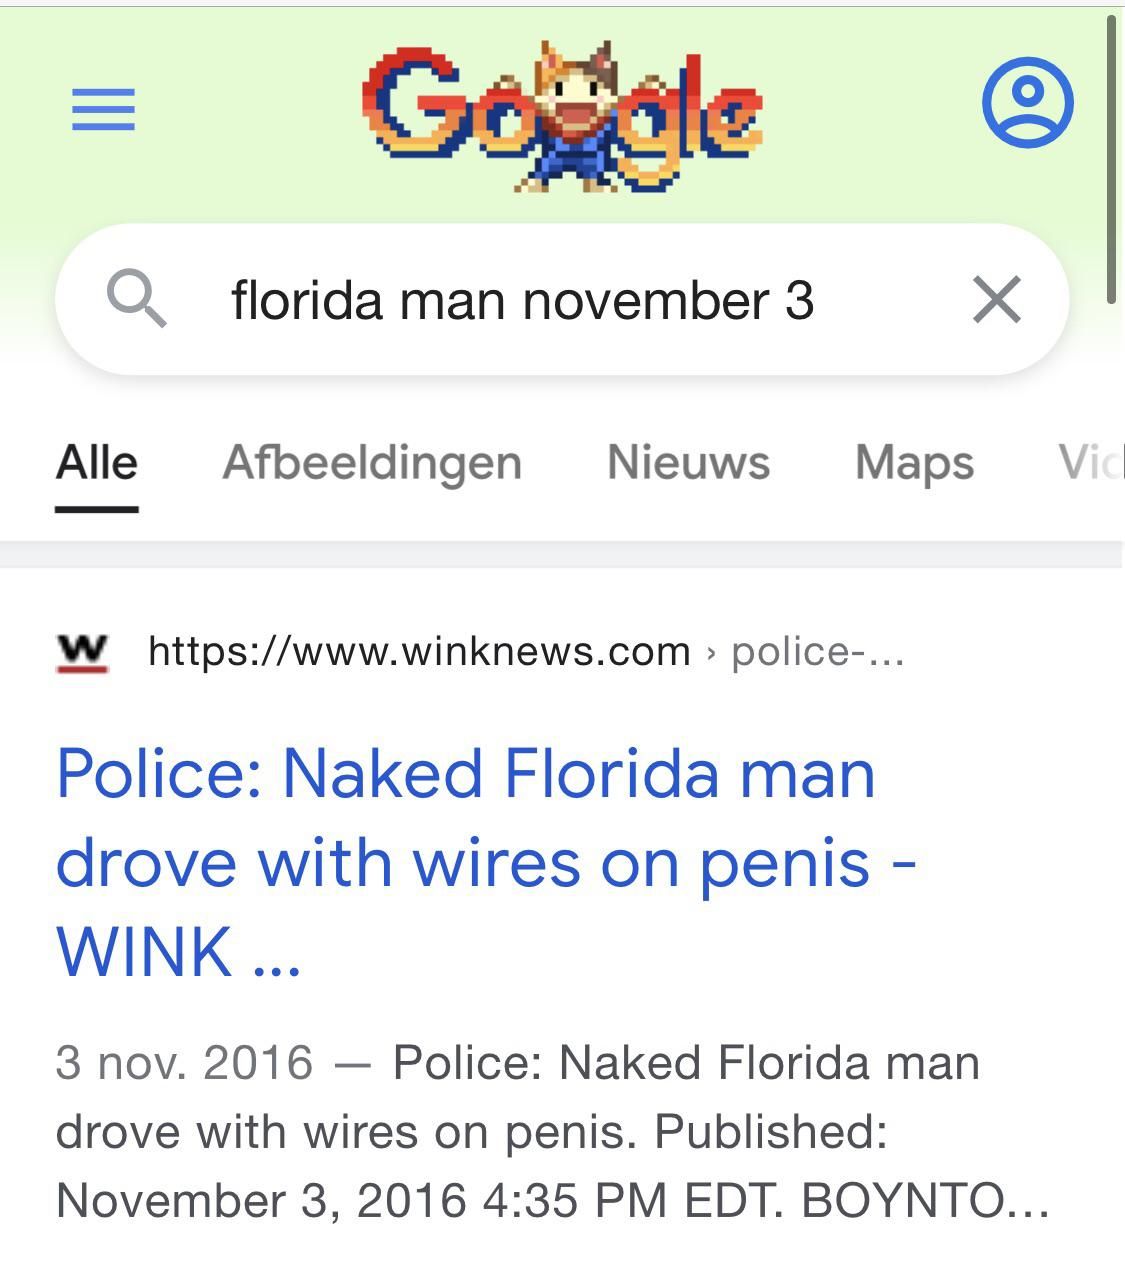 Google “Florida Man and your birthday” What did he do on your BD?